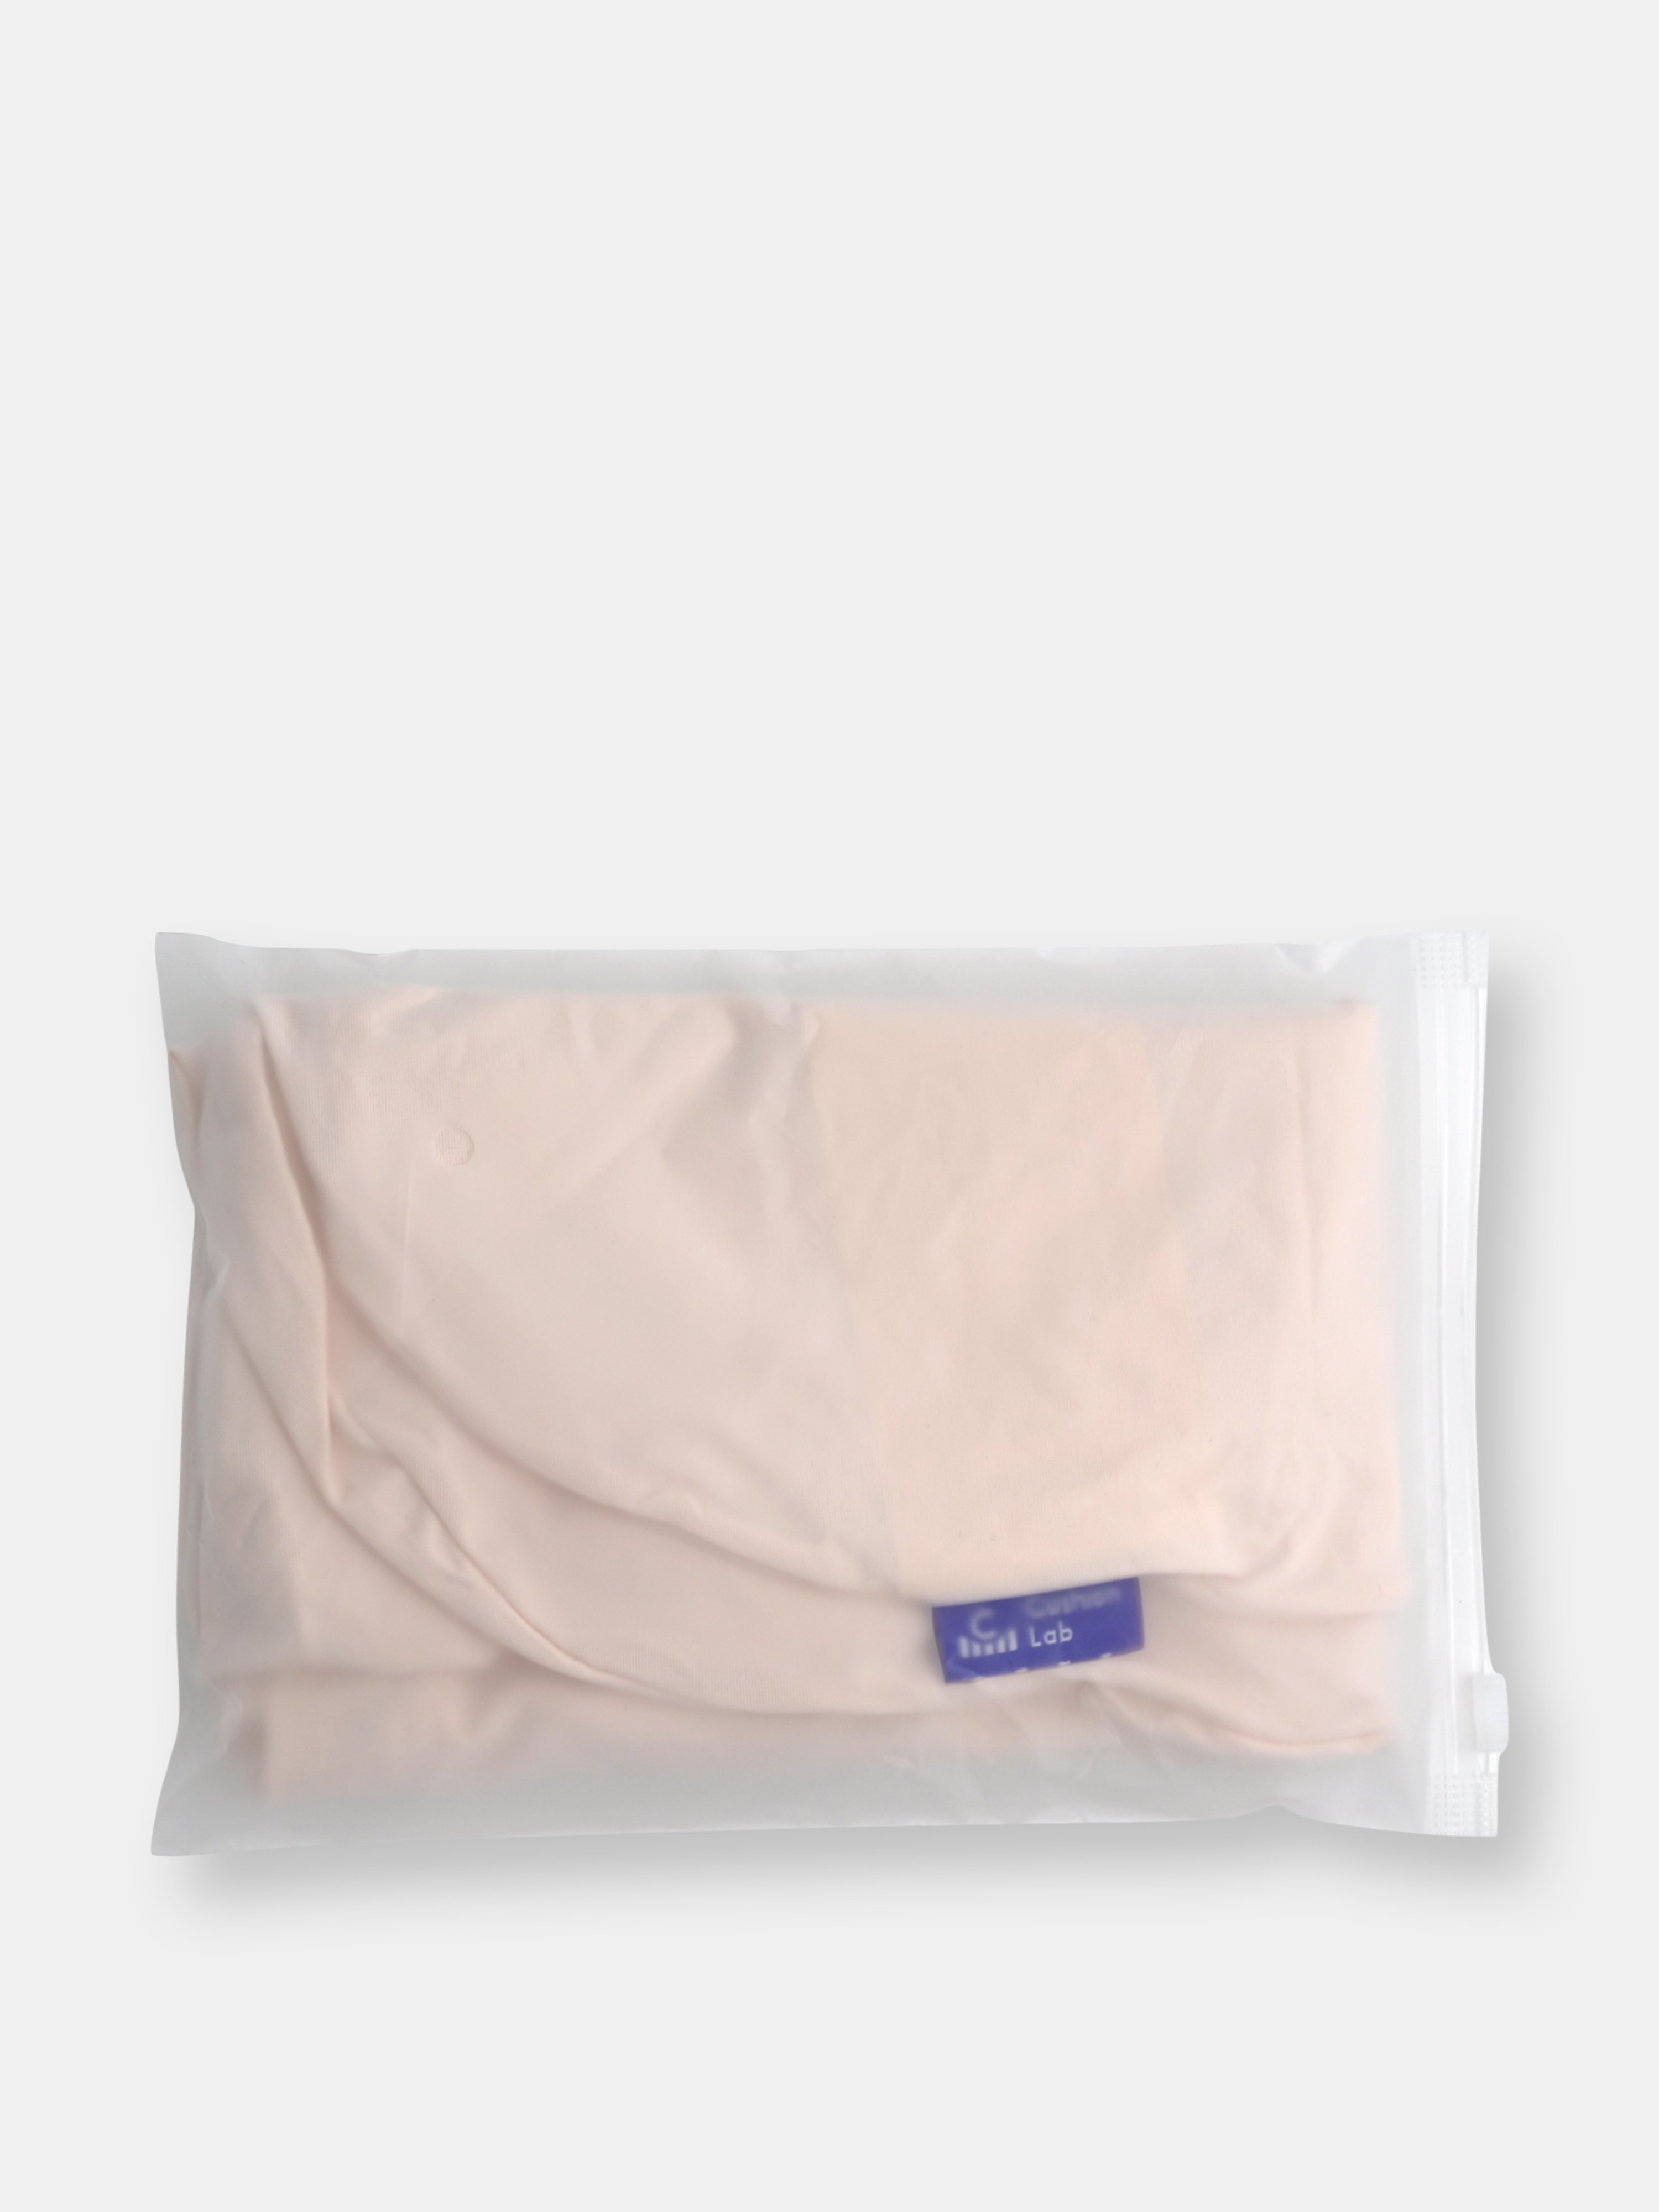 https://assets.verishop.com/cushion-lab-deep-sleep-pillow-cover-cover-only/M00749403979079-1285218356?w=3000